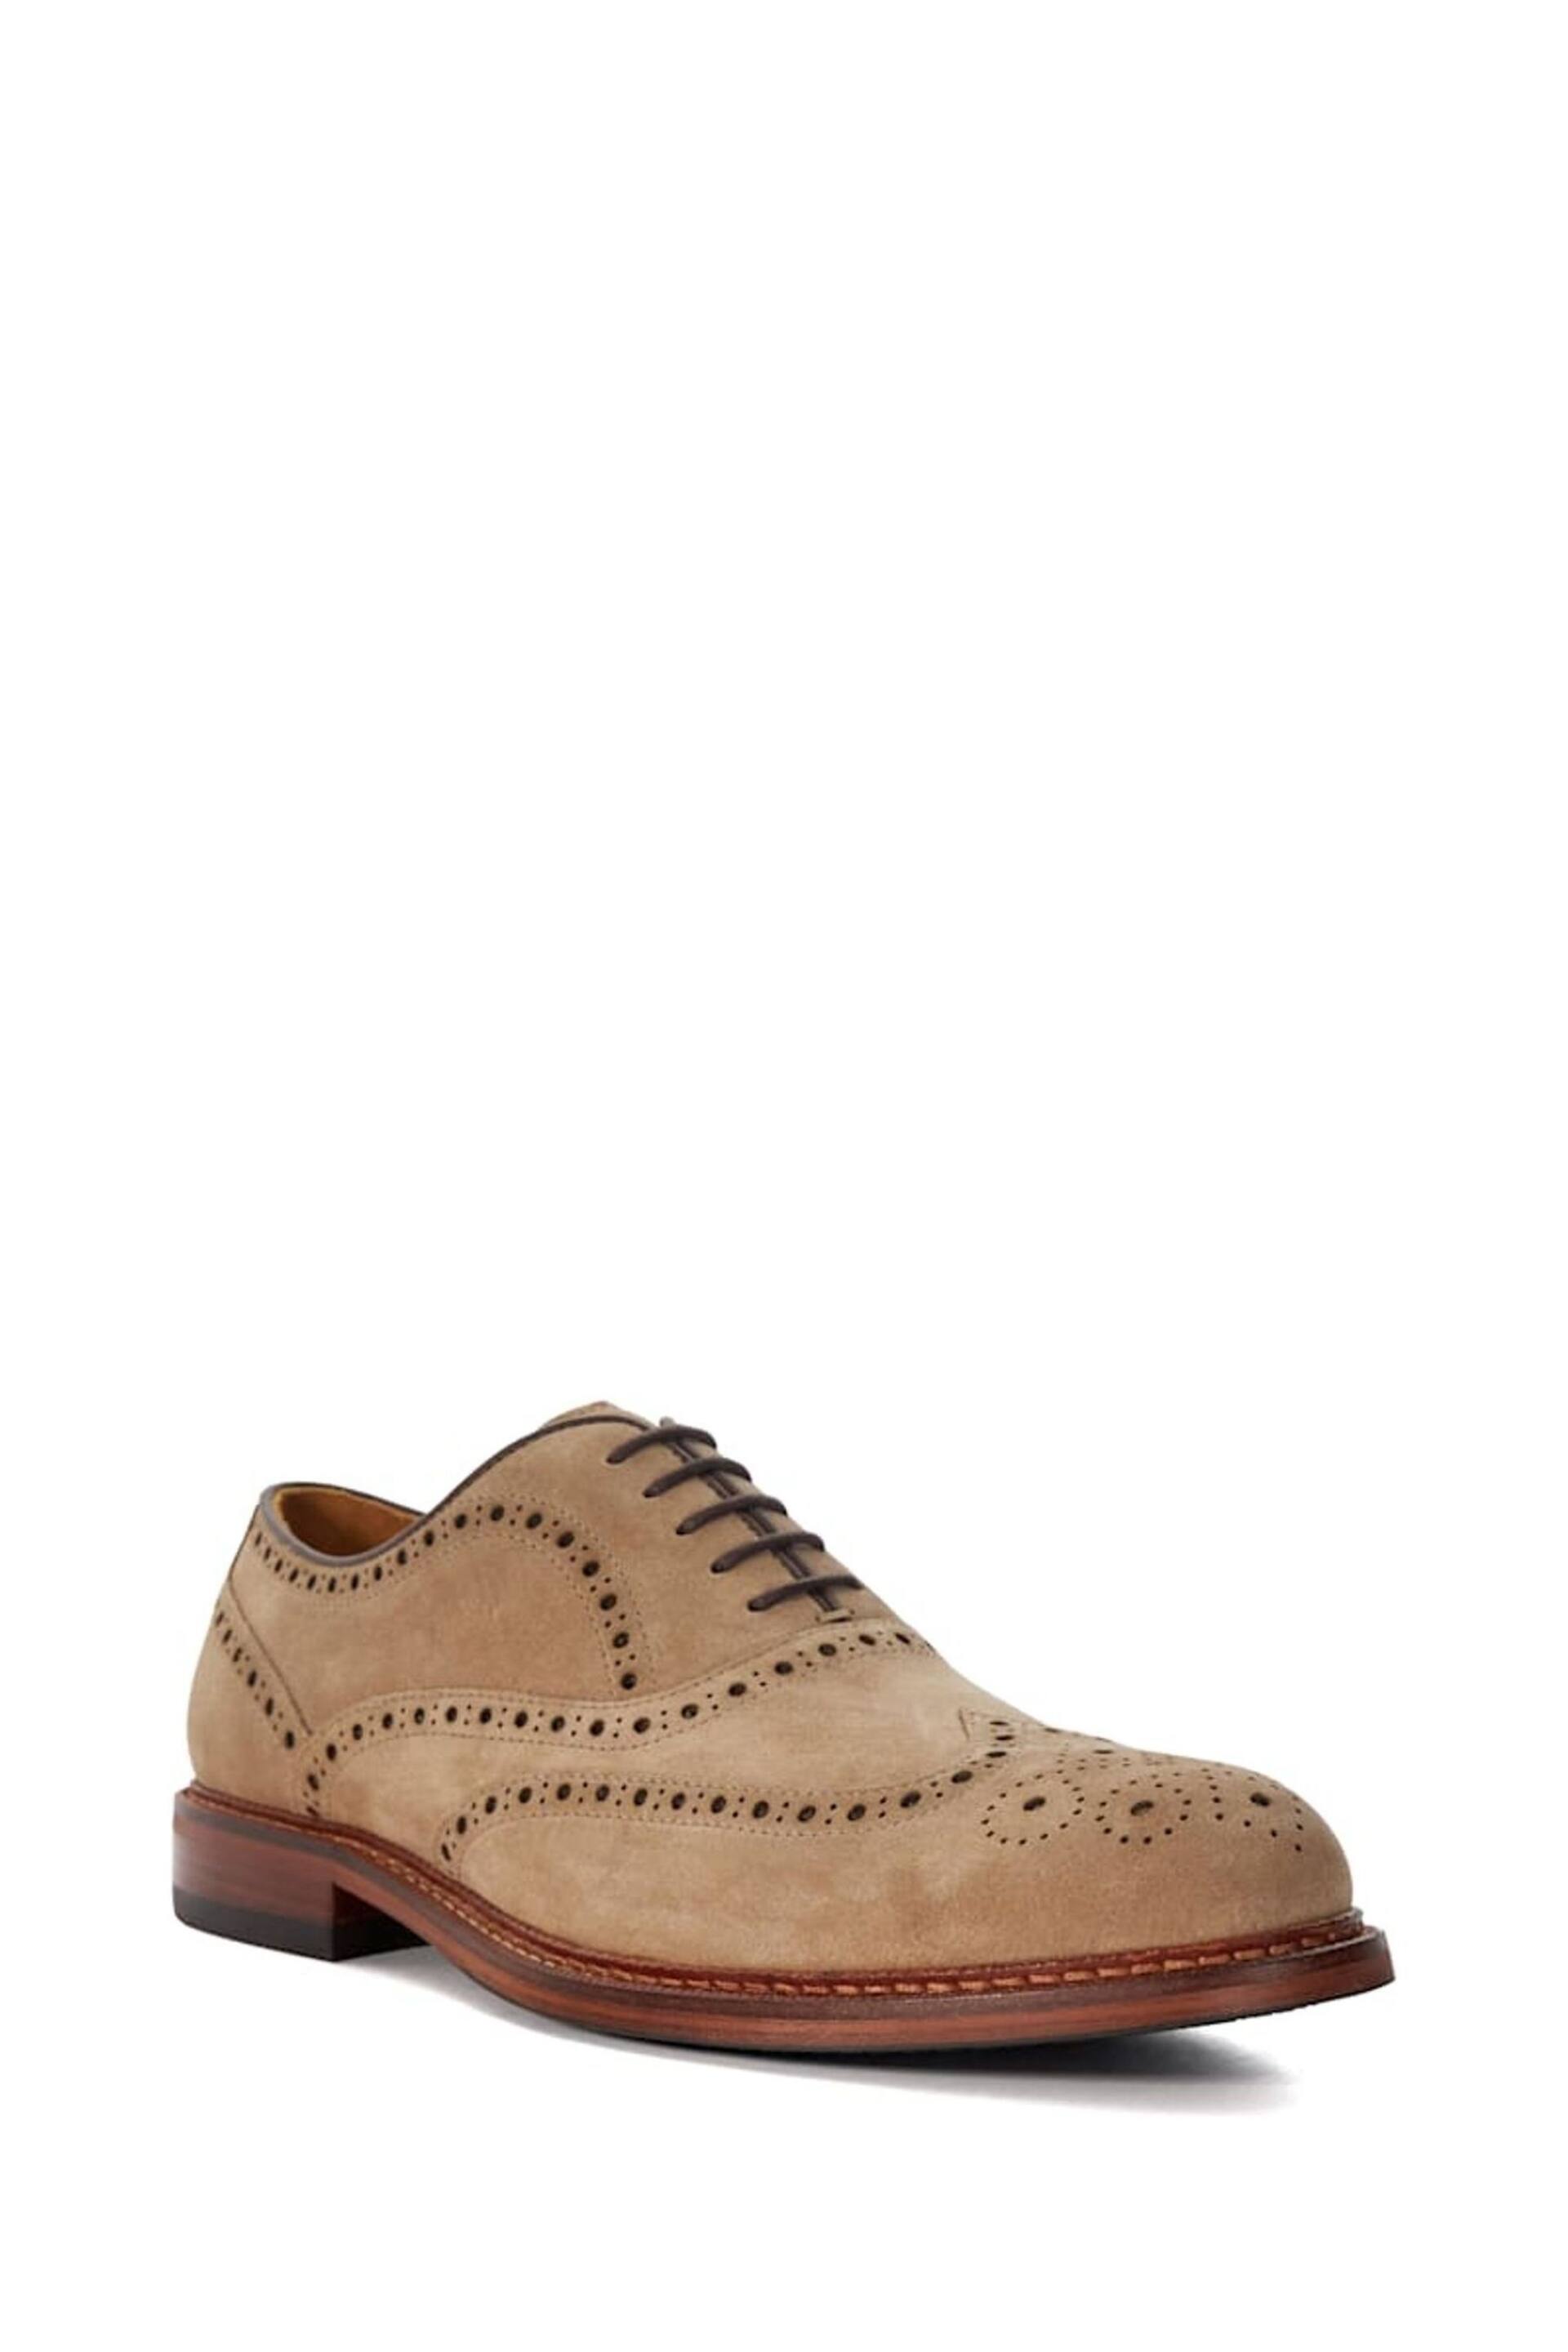 Dune London Brown Ground Solihull Oxford Brogues - Image 4 of 6